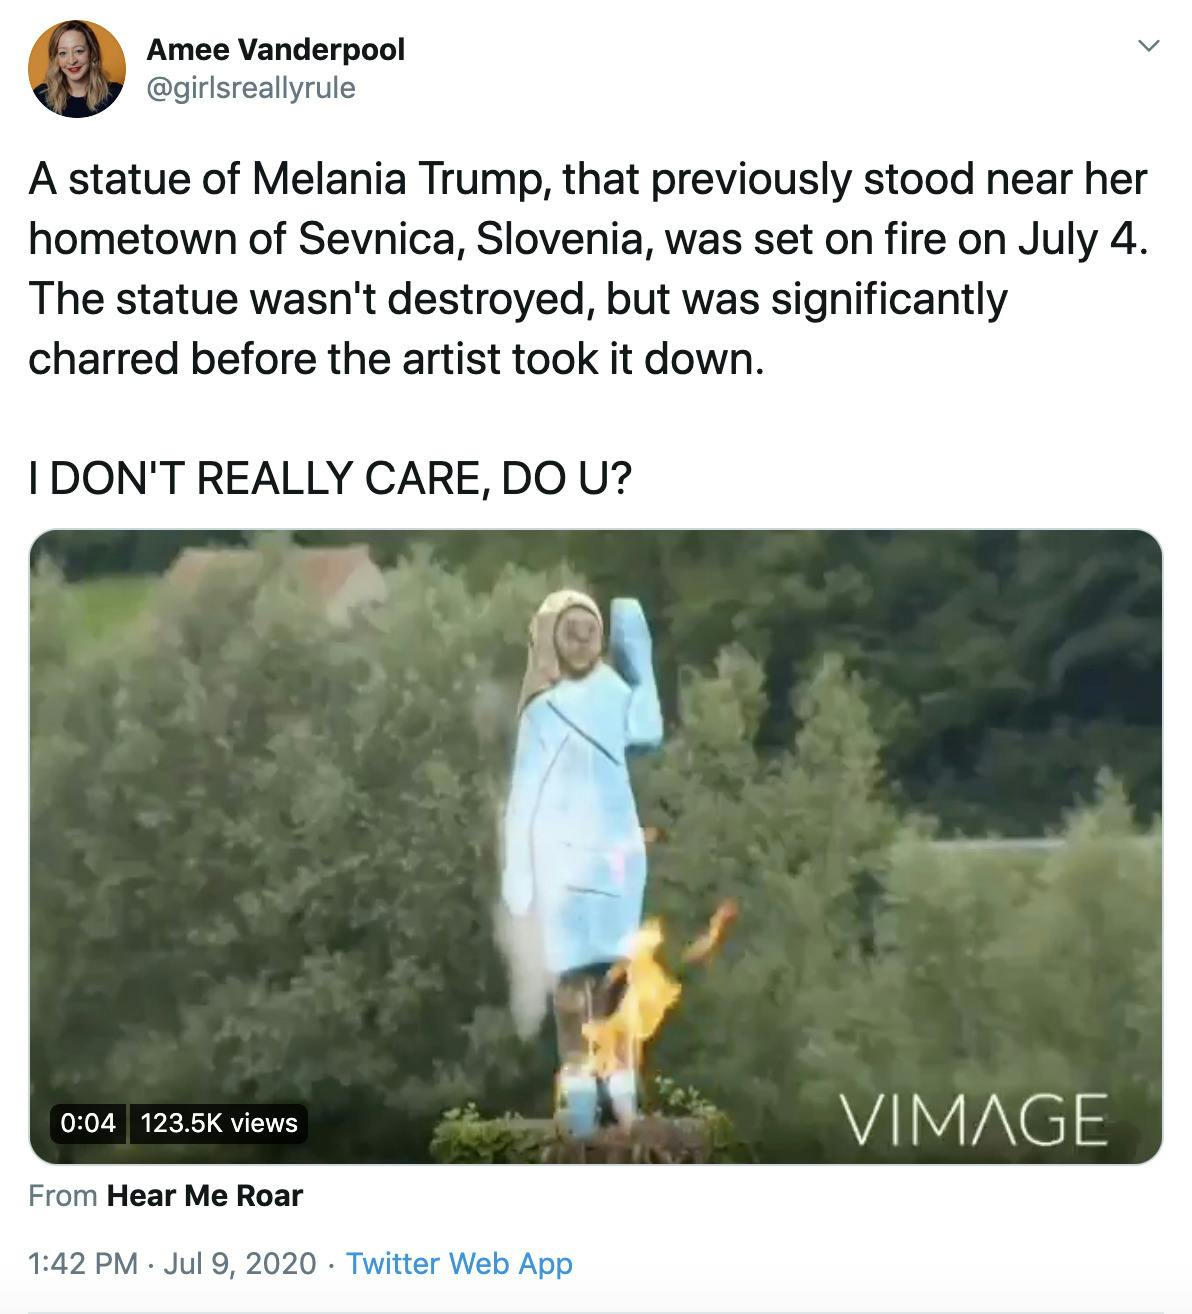 "A statue of Melania Trump, that previously stood near her hometown of Sevnica, Slovenia, was set on fire on July 4. The statue wasn't destroyed, but was significantly charred before the artist took it down.   I DON'T REALLY CARE, DO U?" gif of statue burning